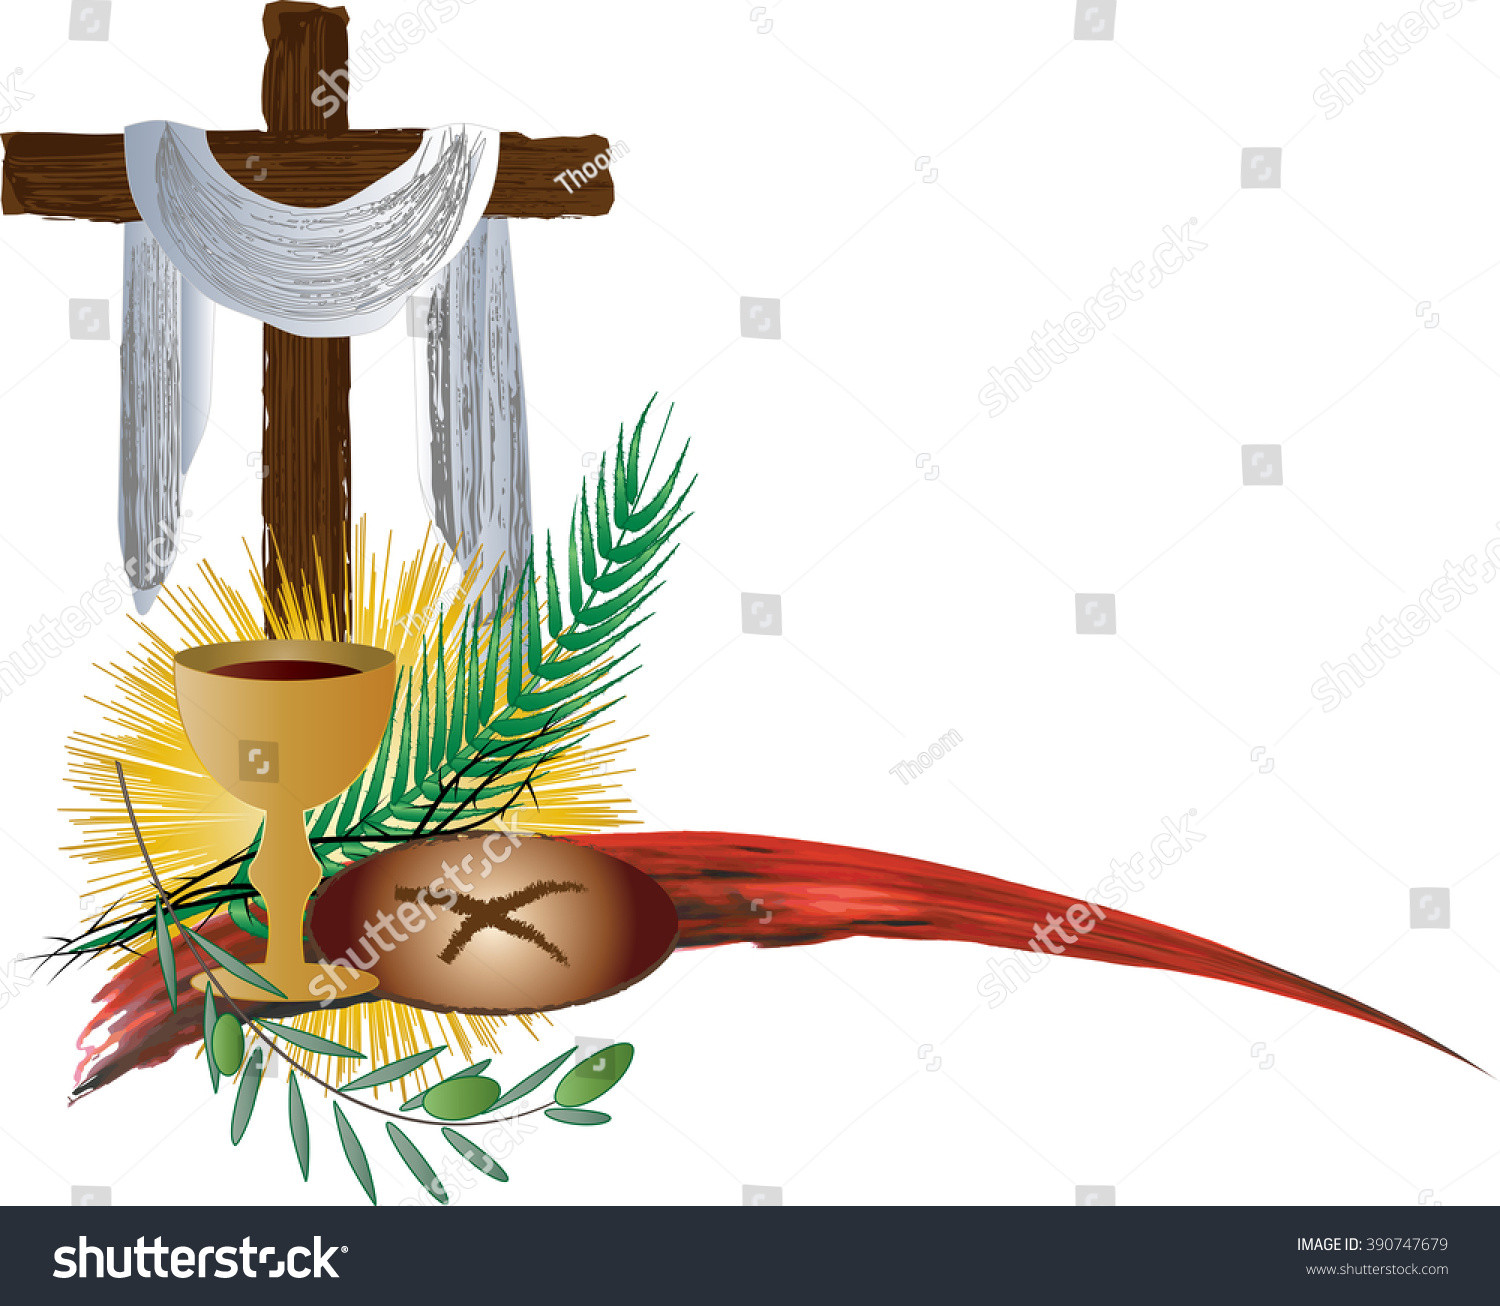 Bread And Wine Readings For Lent And Easter
 Eucharist Symbols Bread And Wine With The Symbols